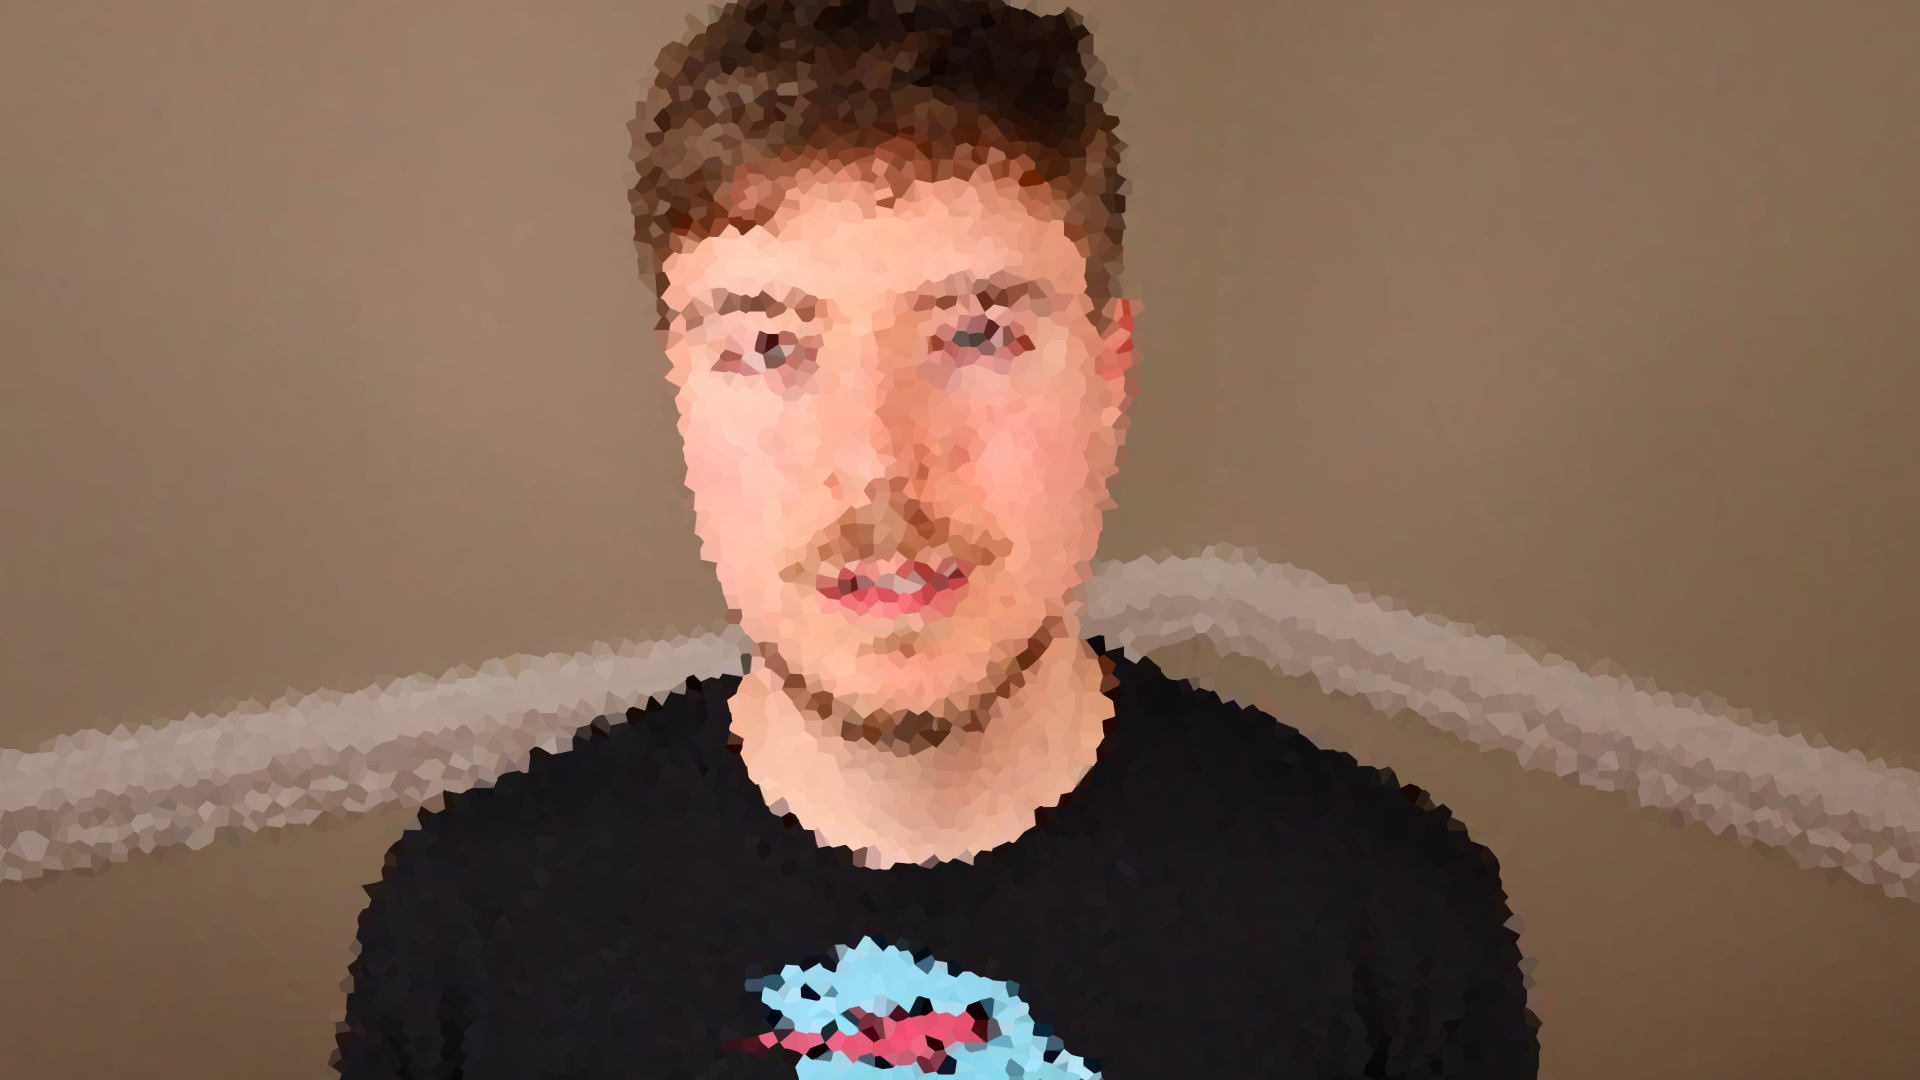 A pixelated image of a YouTuber